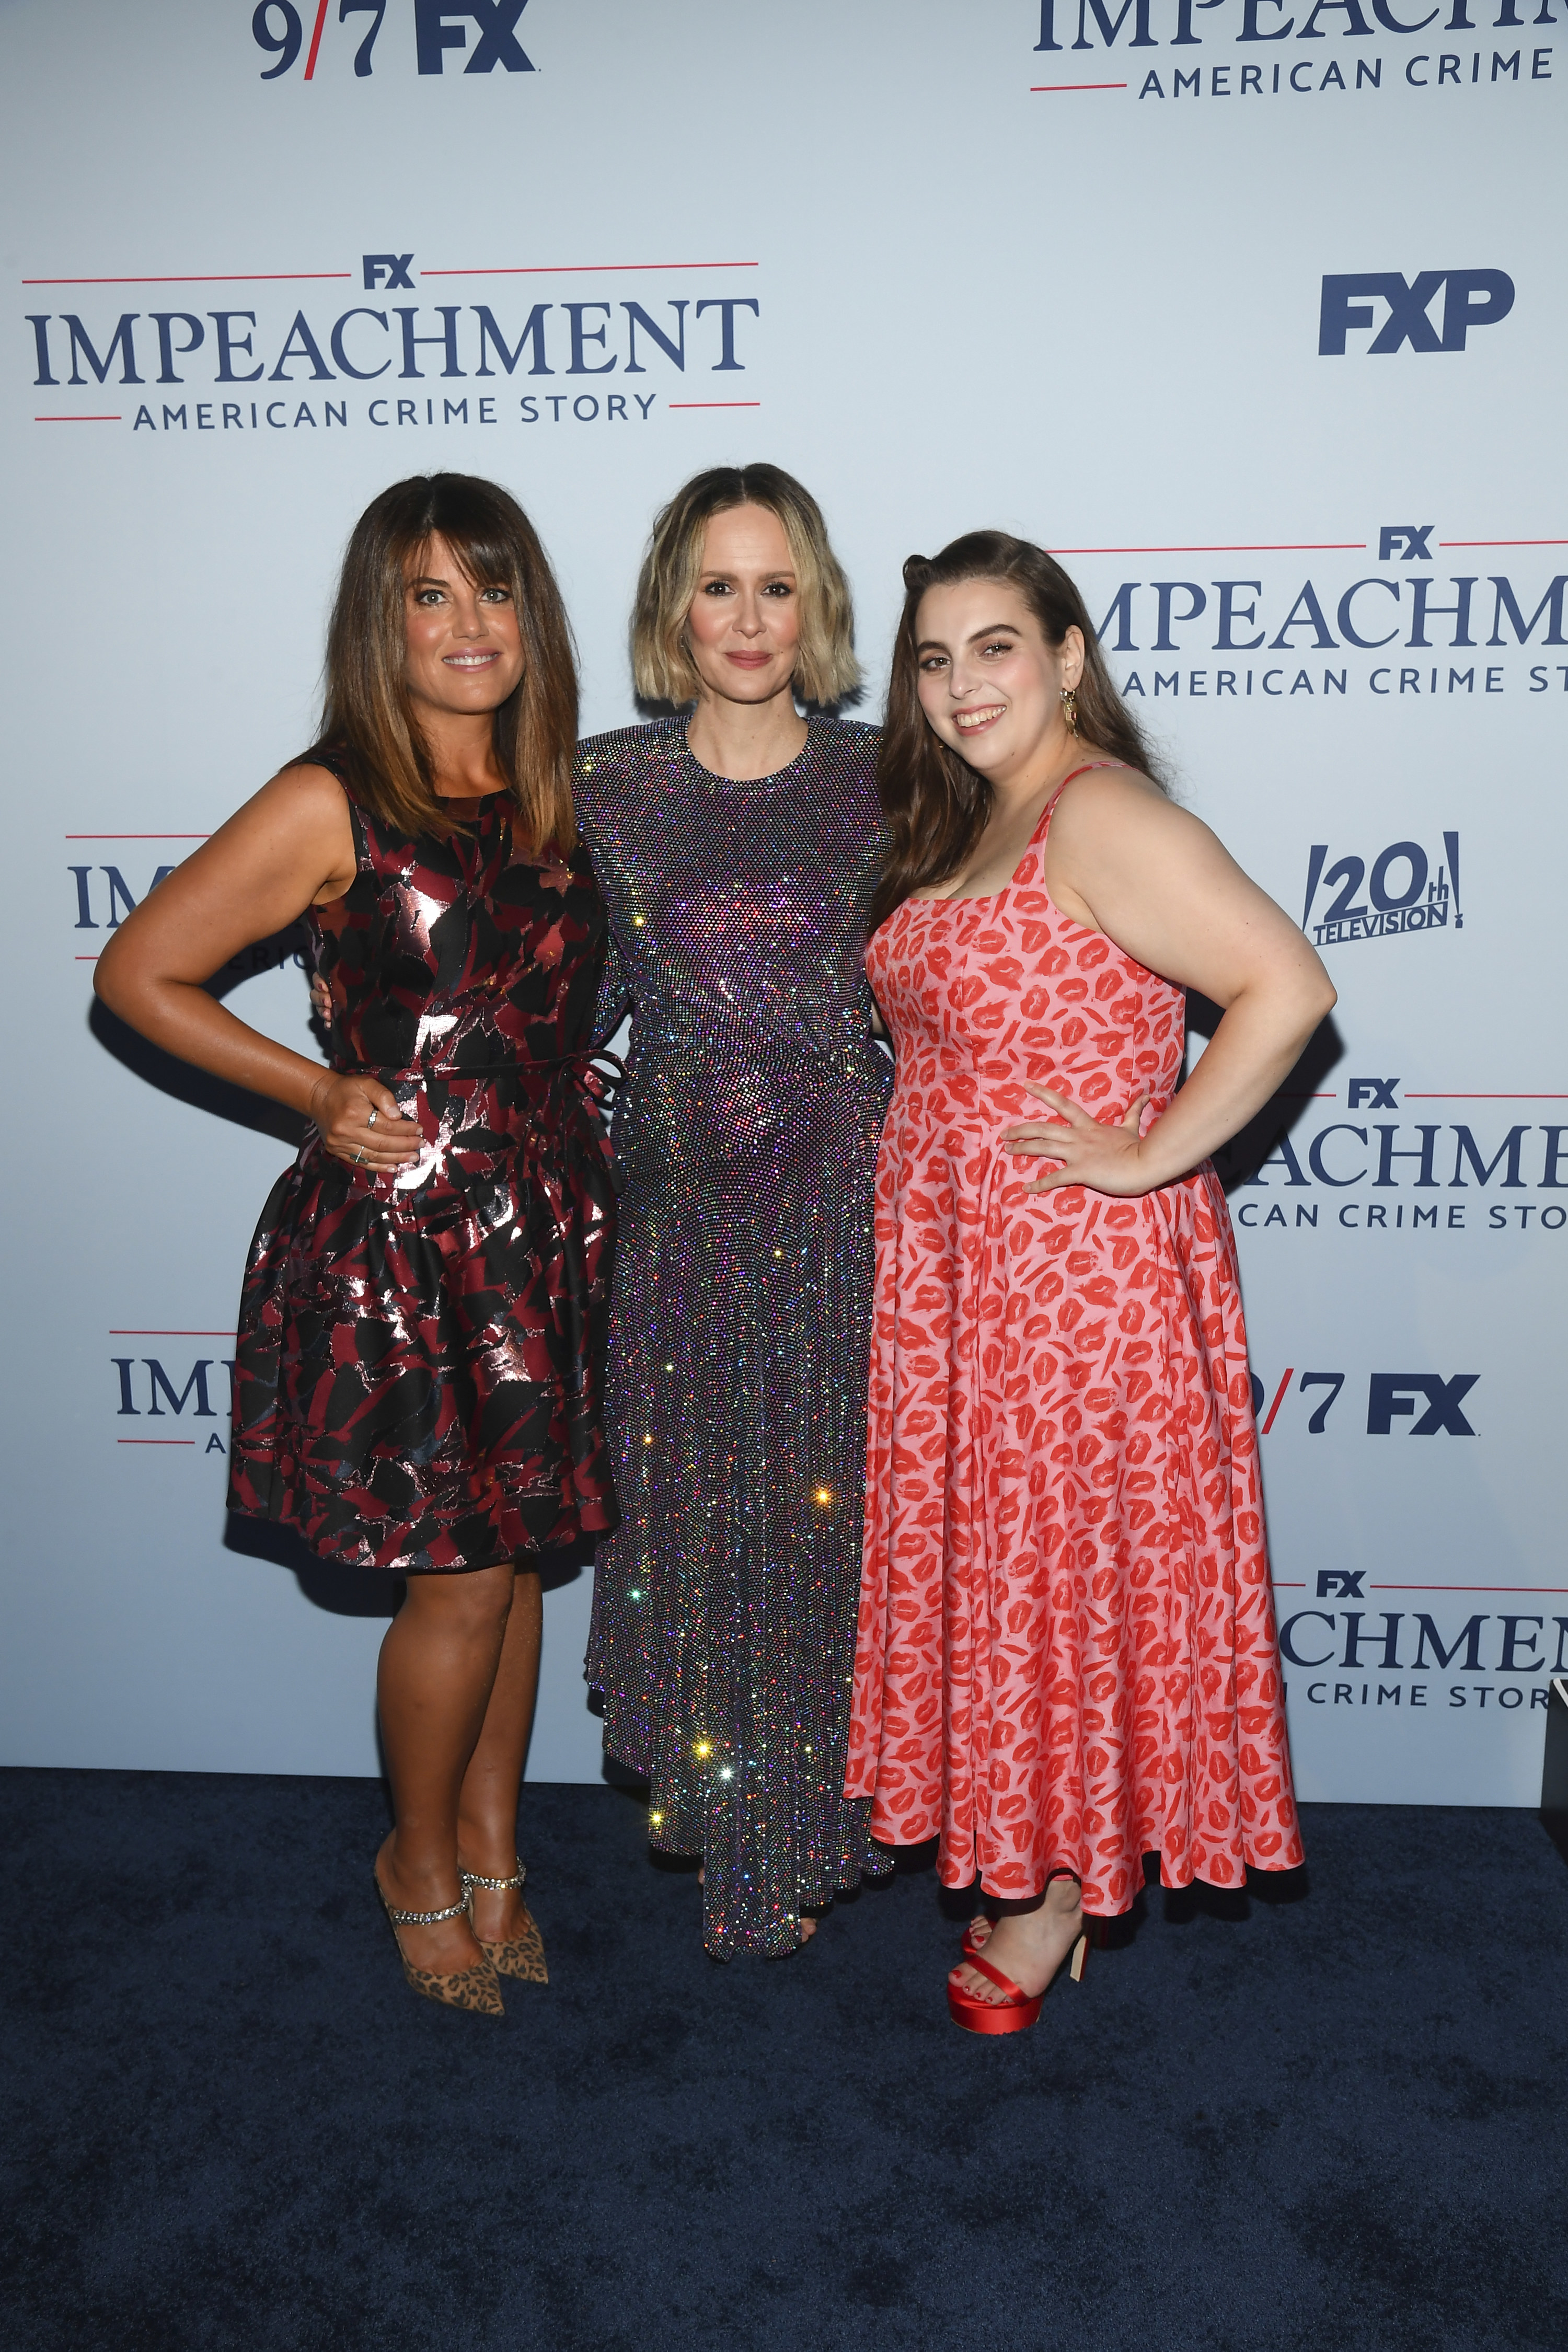 From left to right to left: The real Monica Lewinsky, Sarah Paulson, and Beanie smile for a group photo at a red carpet event